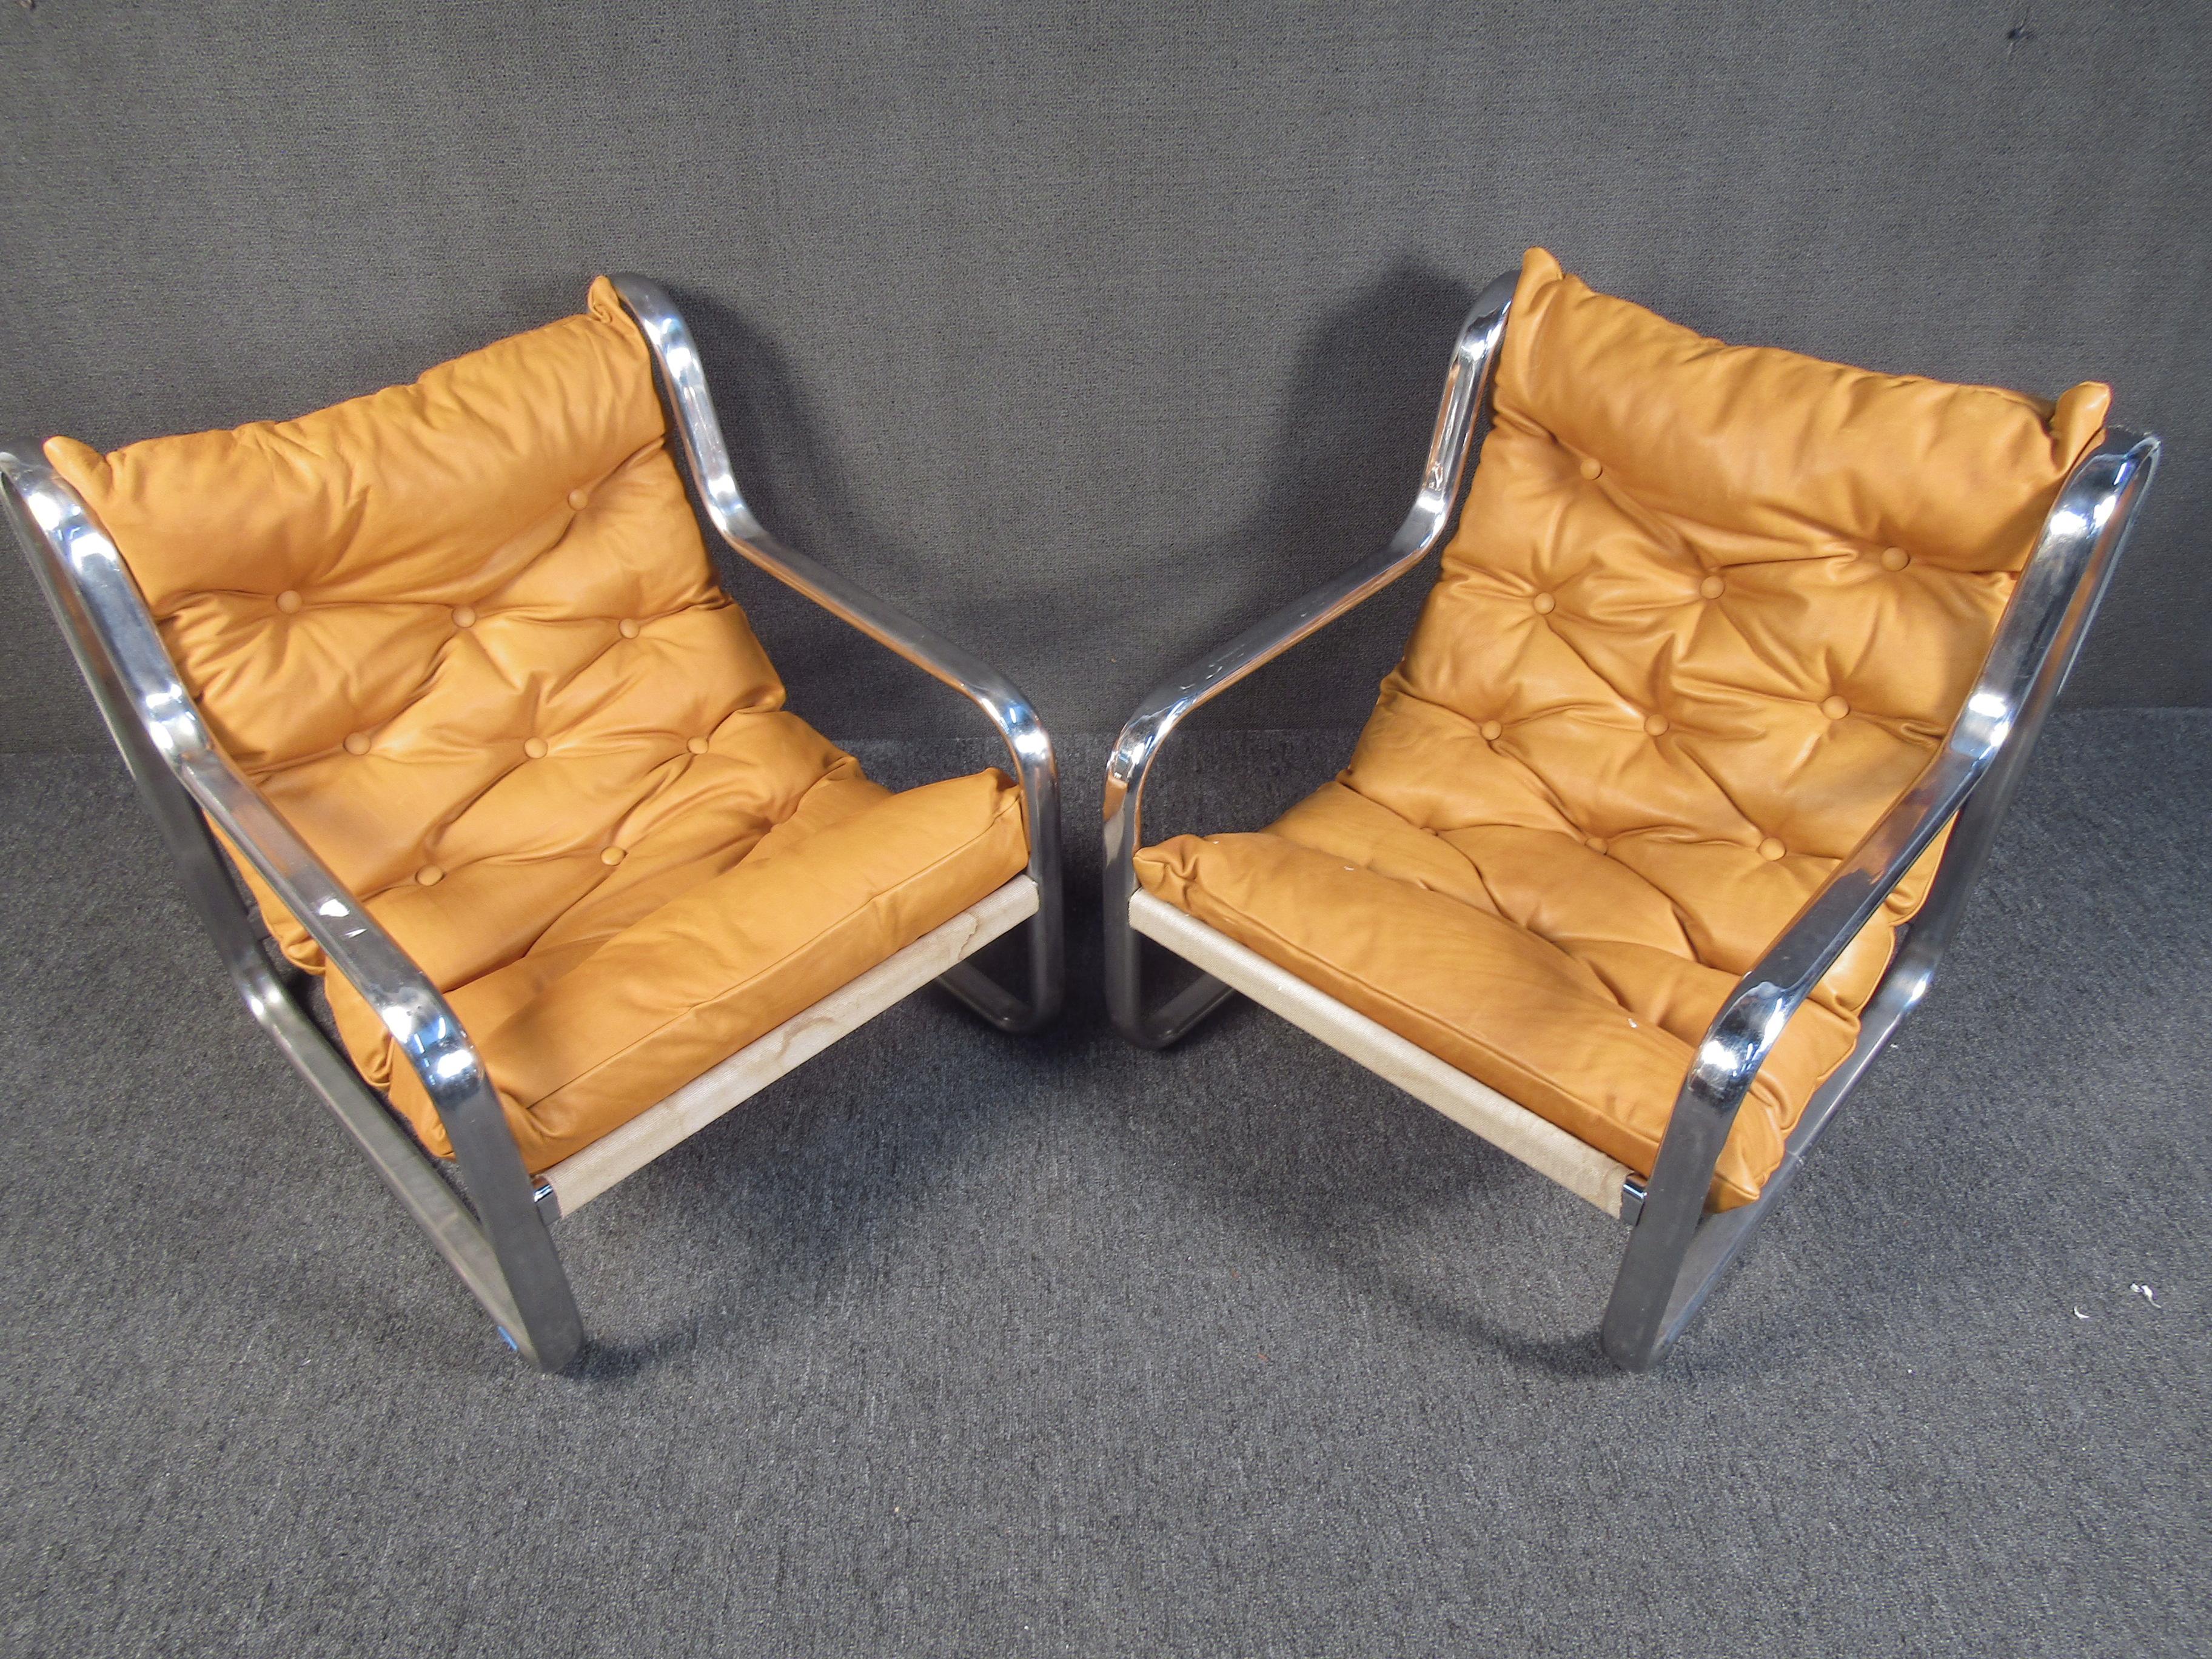 This set of absolutely gorgeous Italian leather lounge chairs features a chrome frame and overstuffed seats for one of the most relaxing set of chairs you will find. Ideal for any home library or sitting room. Please confirm the item location with